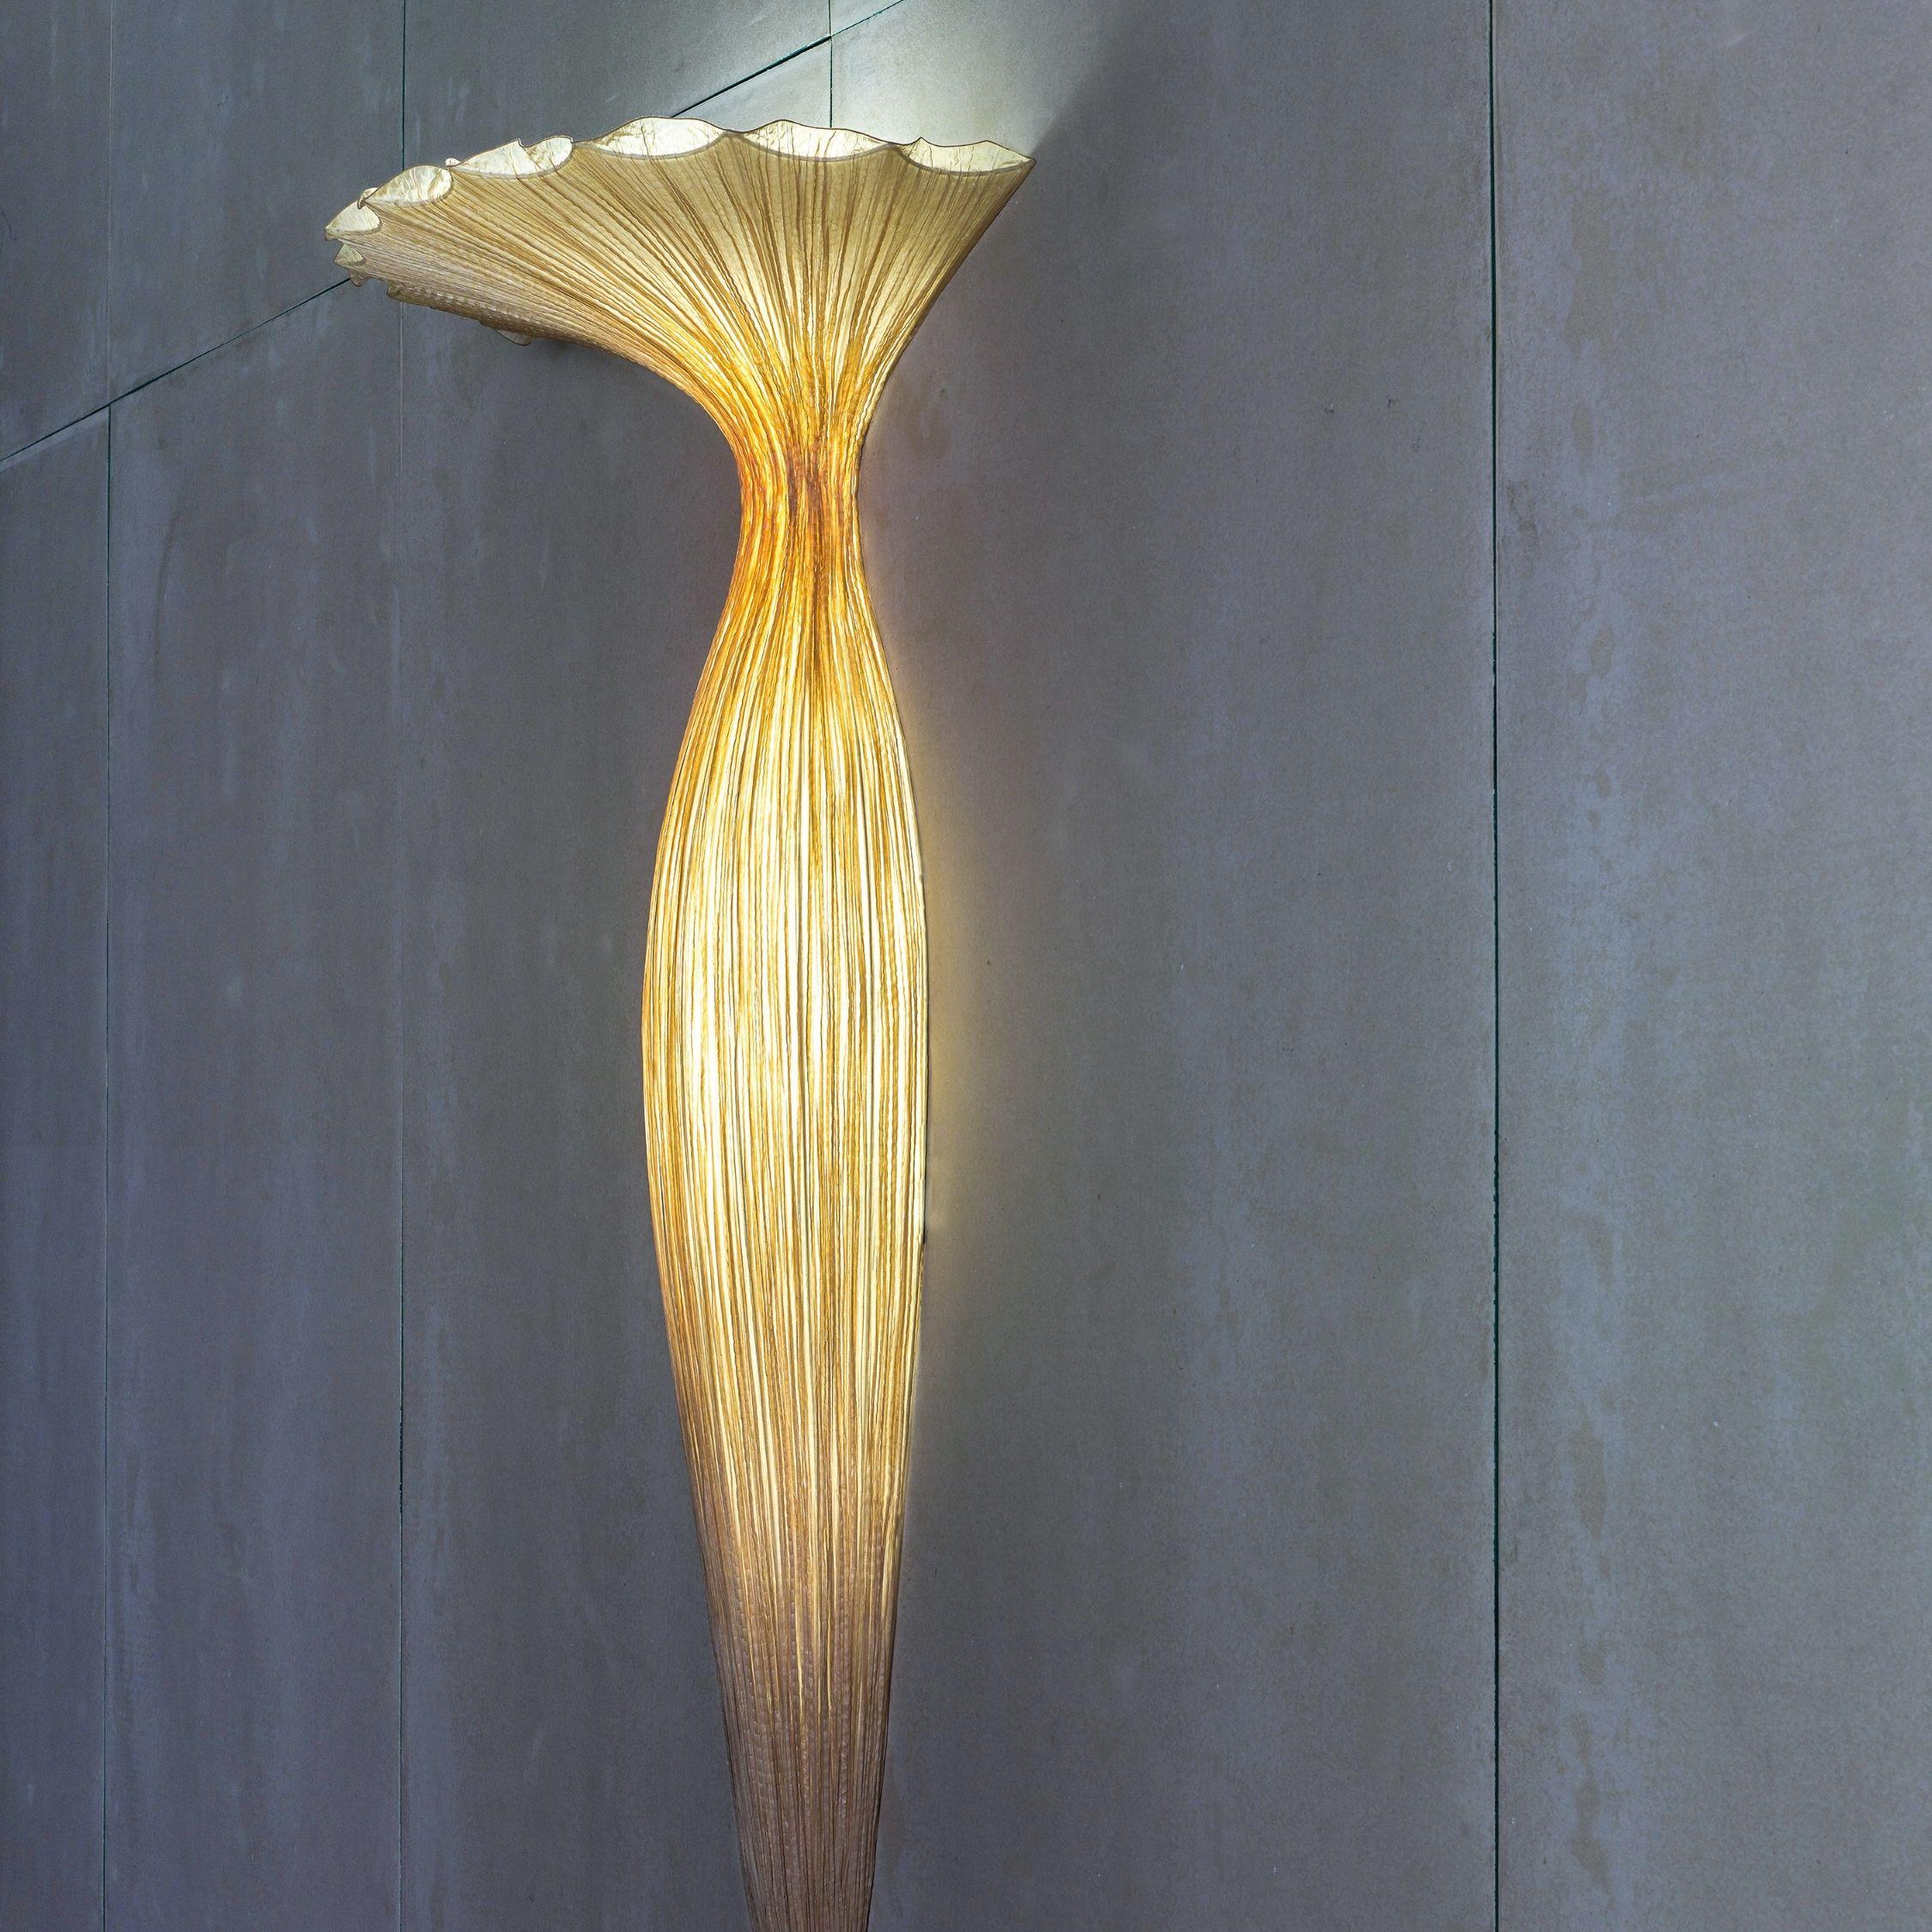 As its name suggests, the evening glory wall fixture comes alive like a night-blooming flower. This luminous artwork is part of the morning glory family, including our most iconic lighting collection. Made by hand of crushed silk and metal. It casts